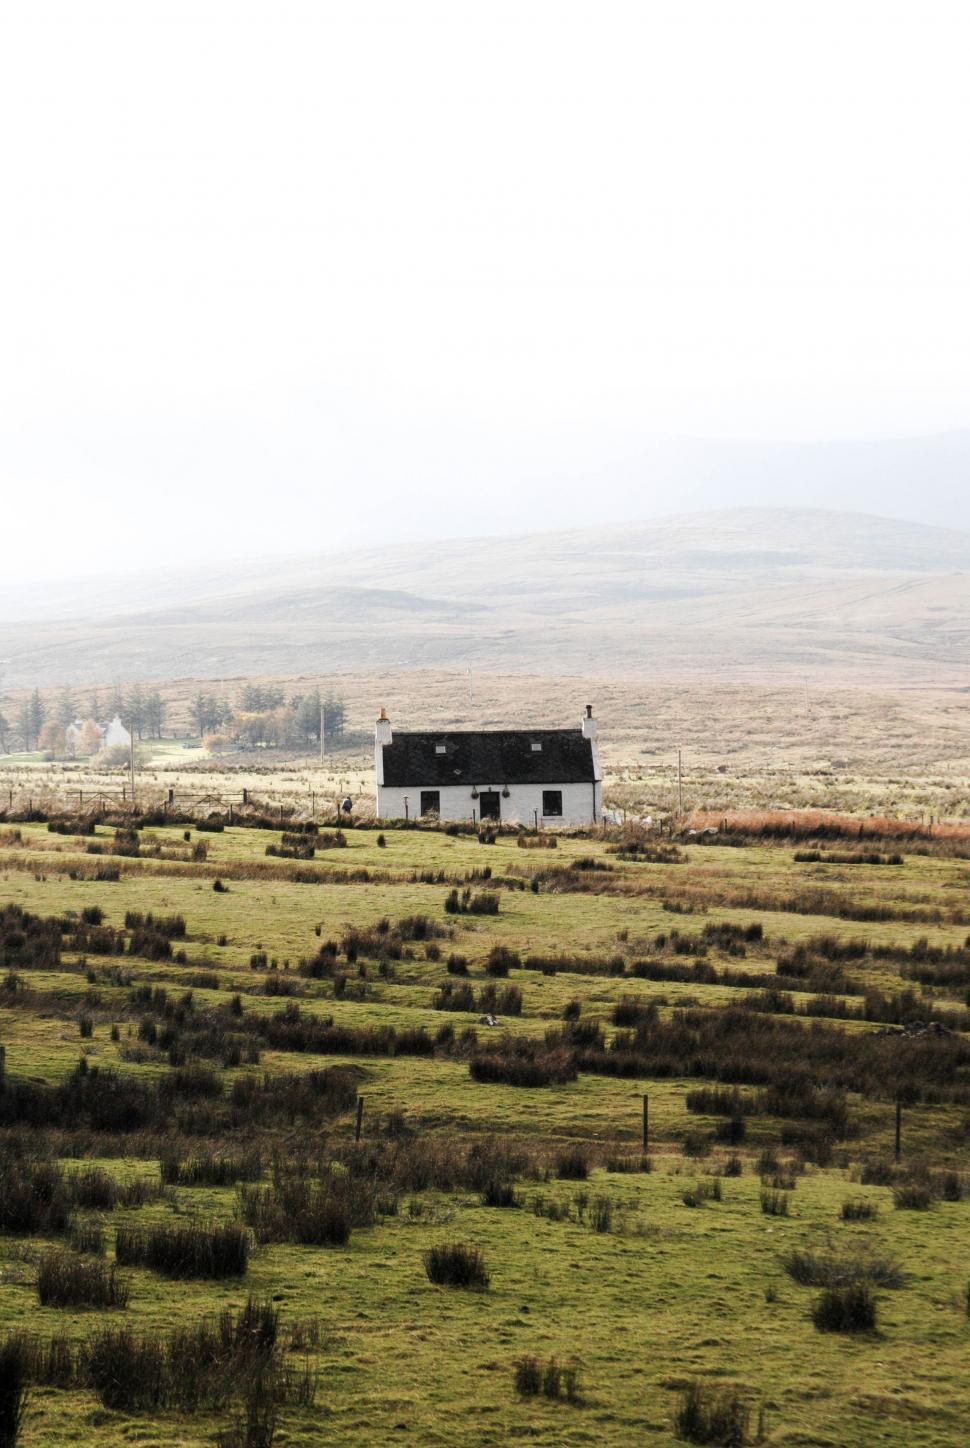 Free Image of Lone House Amidst Field With Distant Mountains 